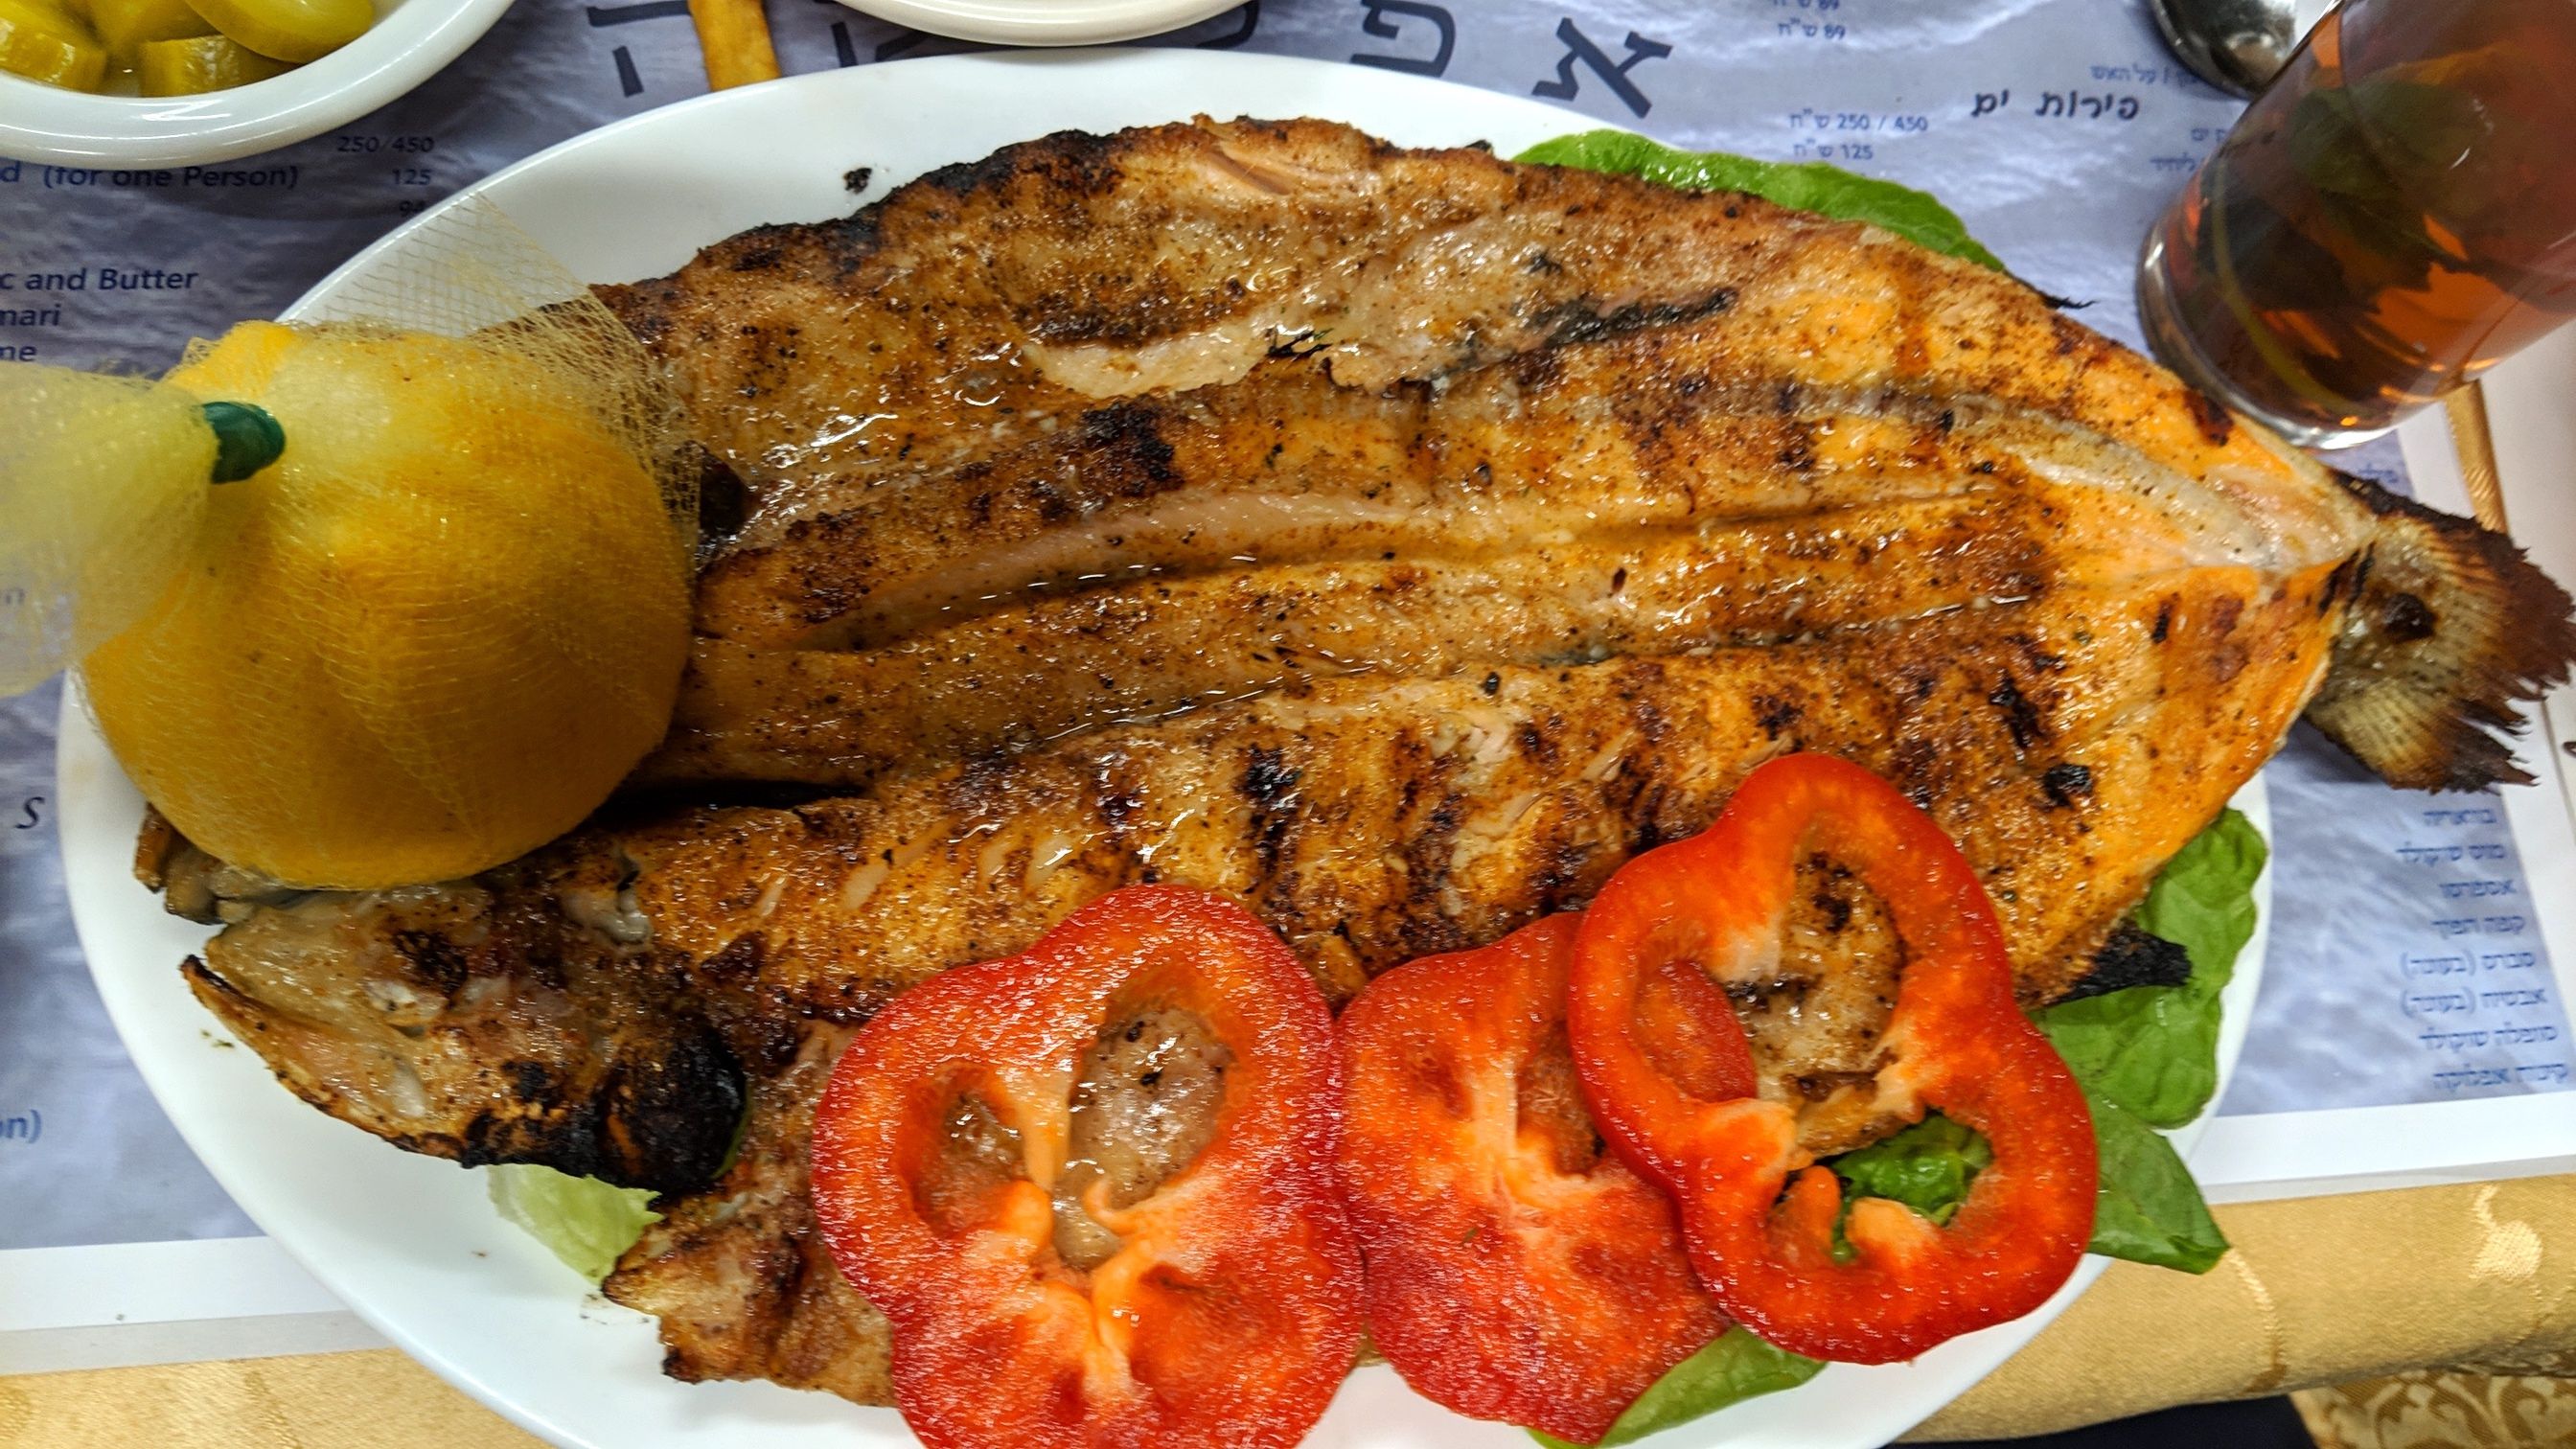 Whole fish spiced right and grilled perfectly in Israel